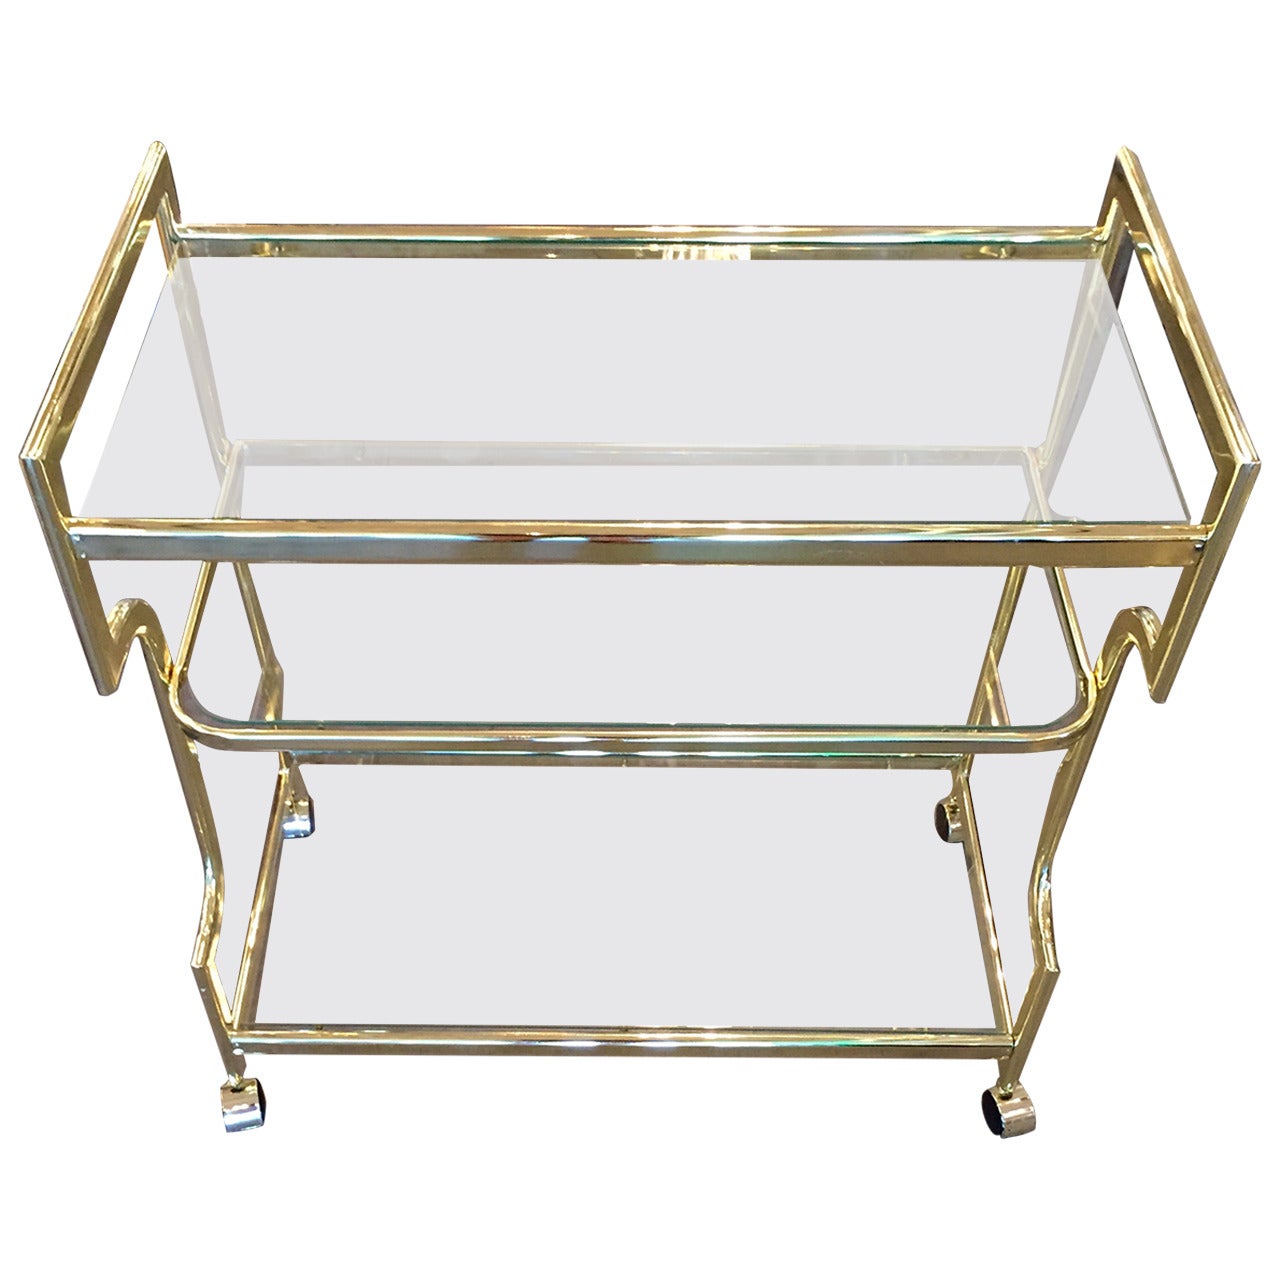 Hollywood Regency Three-Tier Glass and Gold Tone Metal Bar Cart